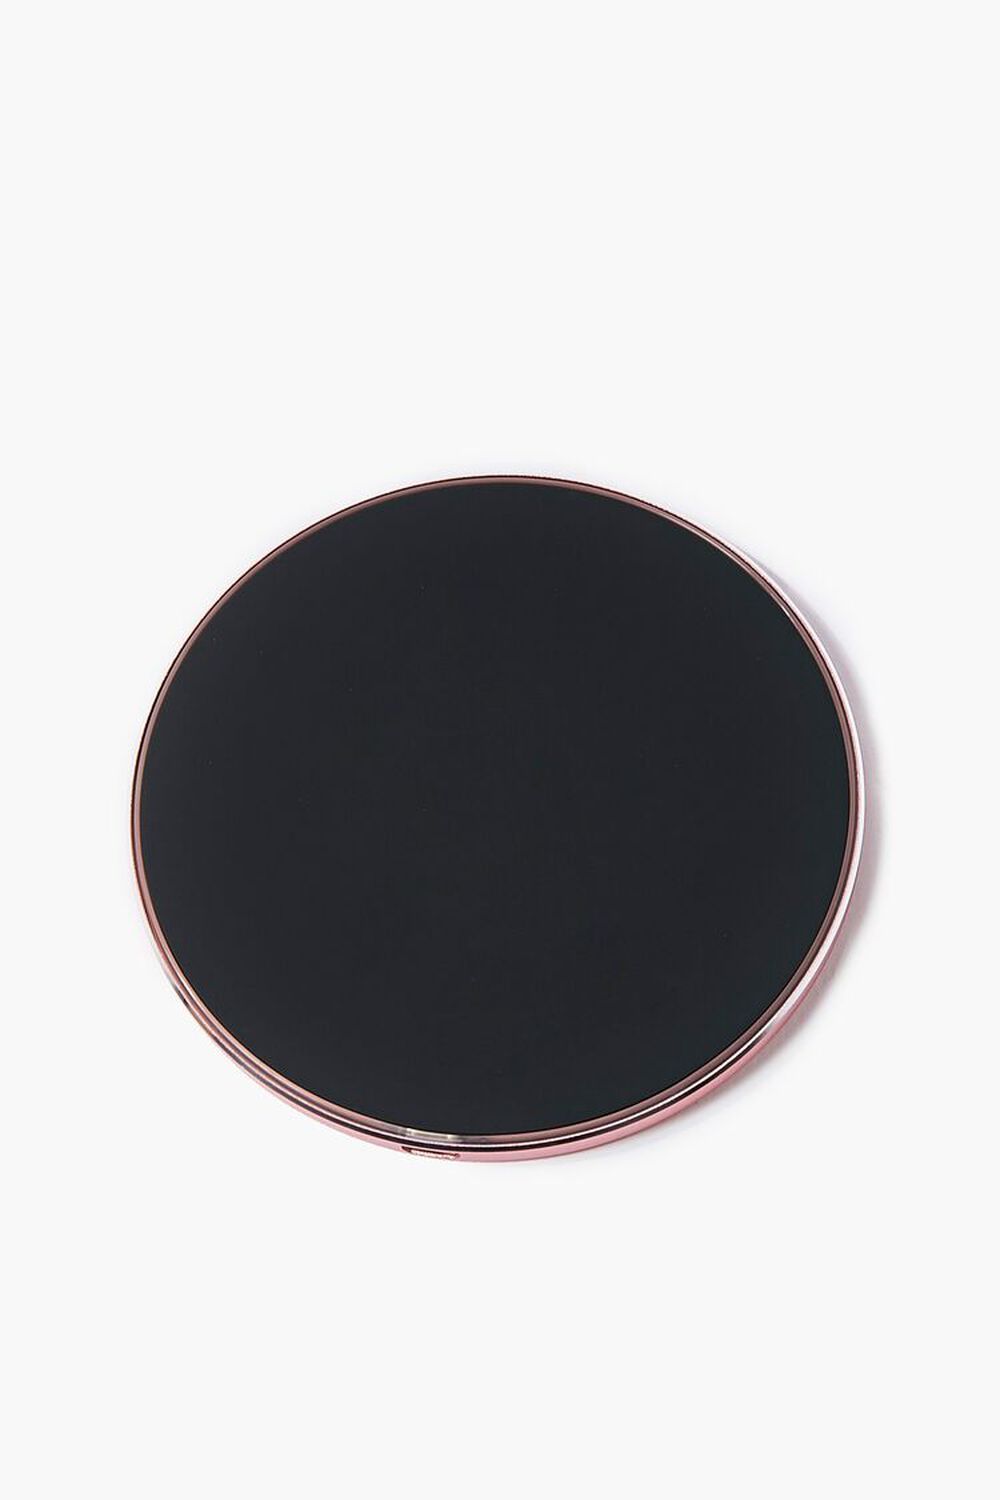 ROSE GOLD Round Wireless Charger, image 1